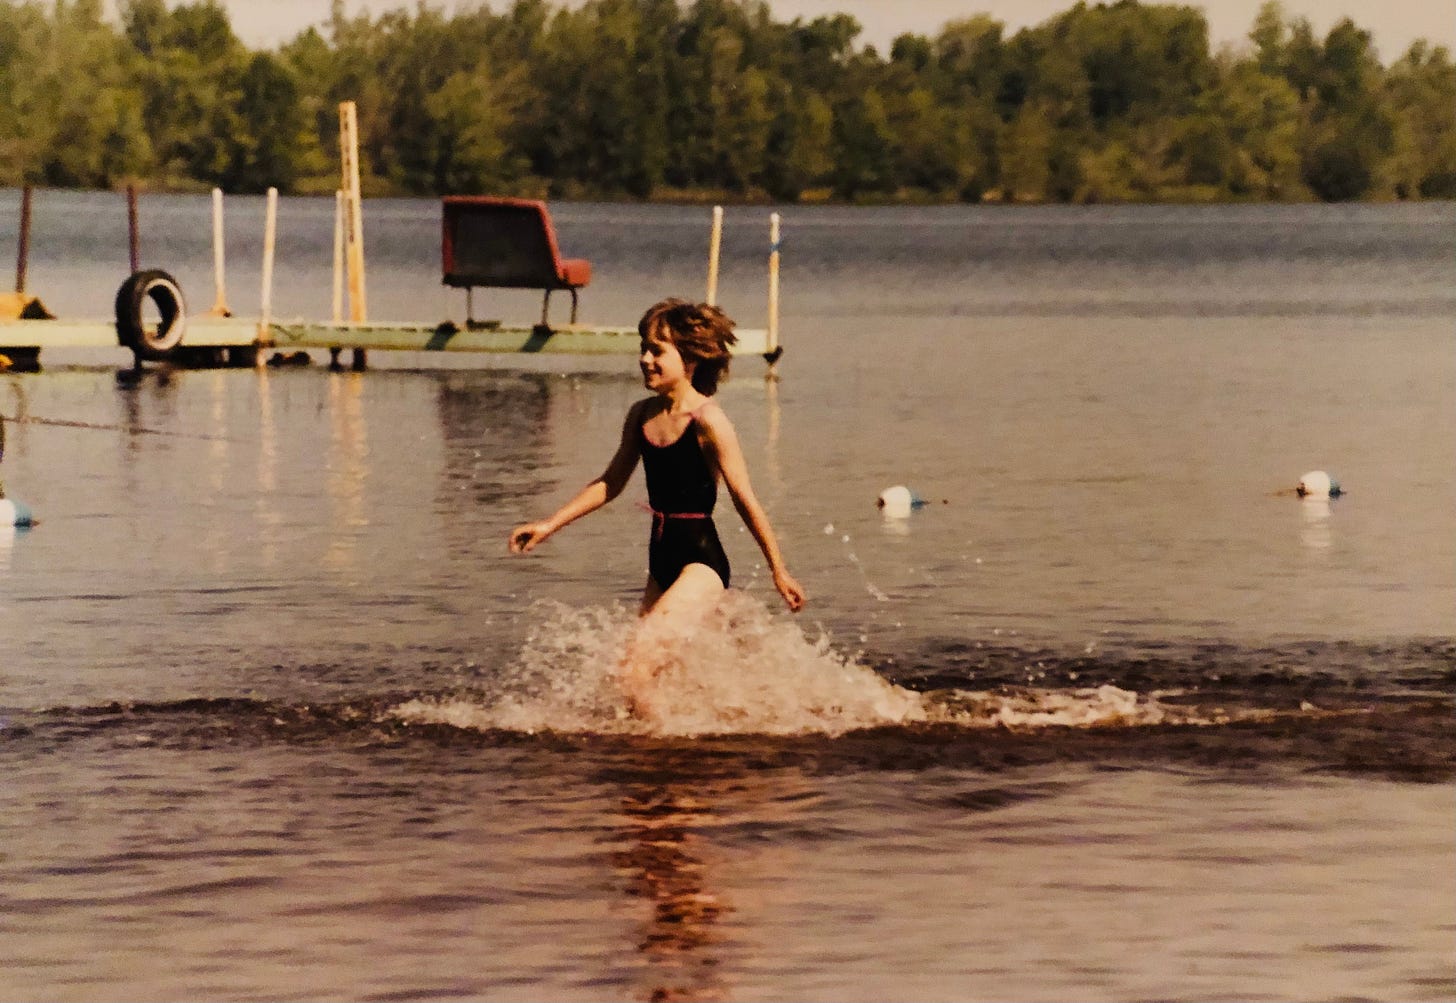 The author in a black swimsuit with a purple belt, running through the water inside the swim buoys with a dock, the lake and trees in the background.